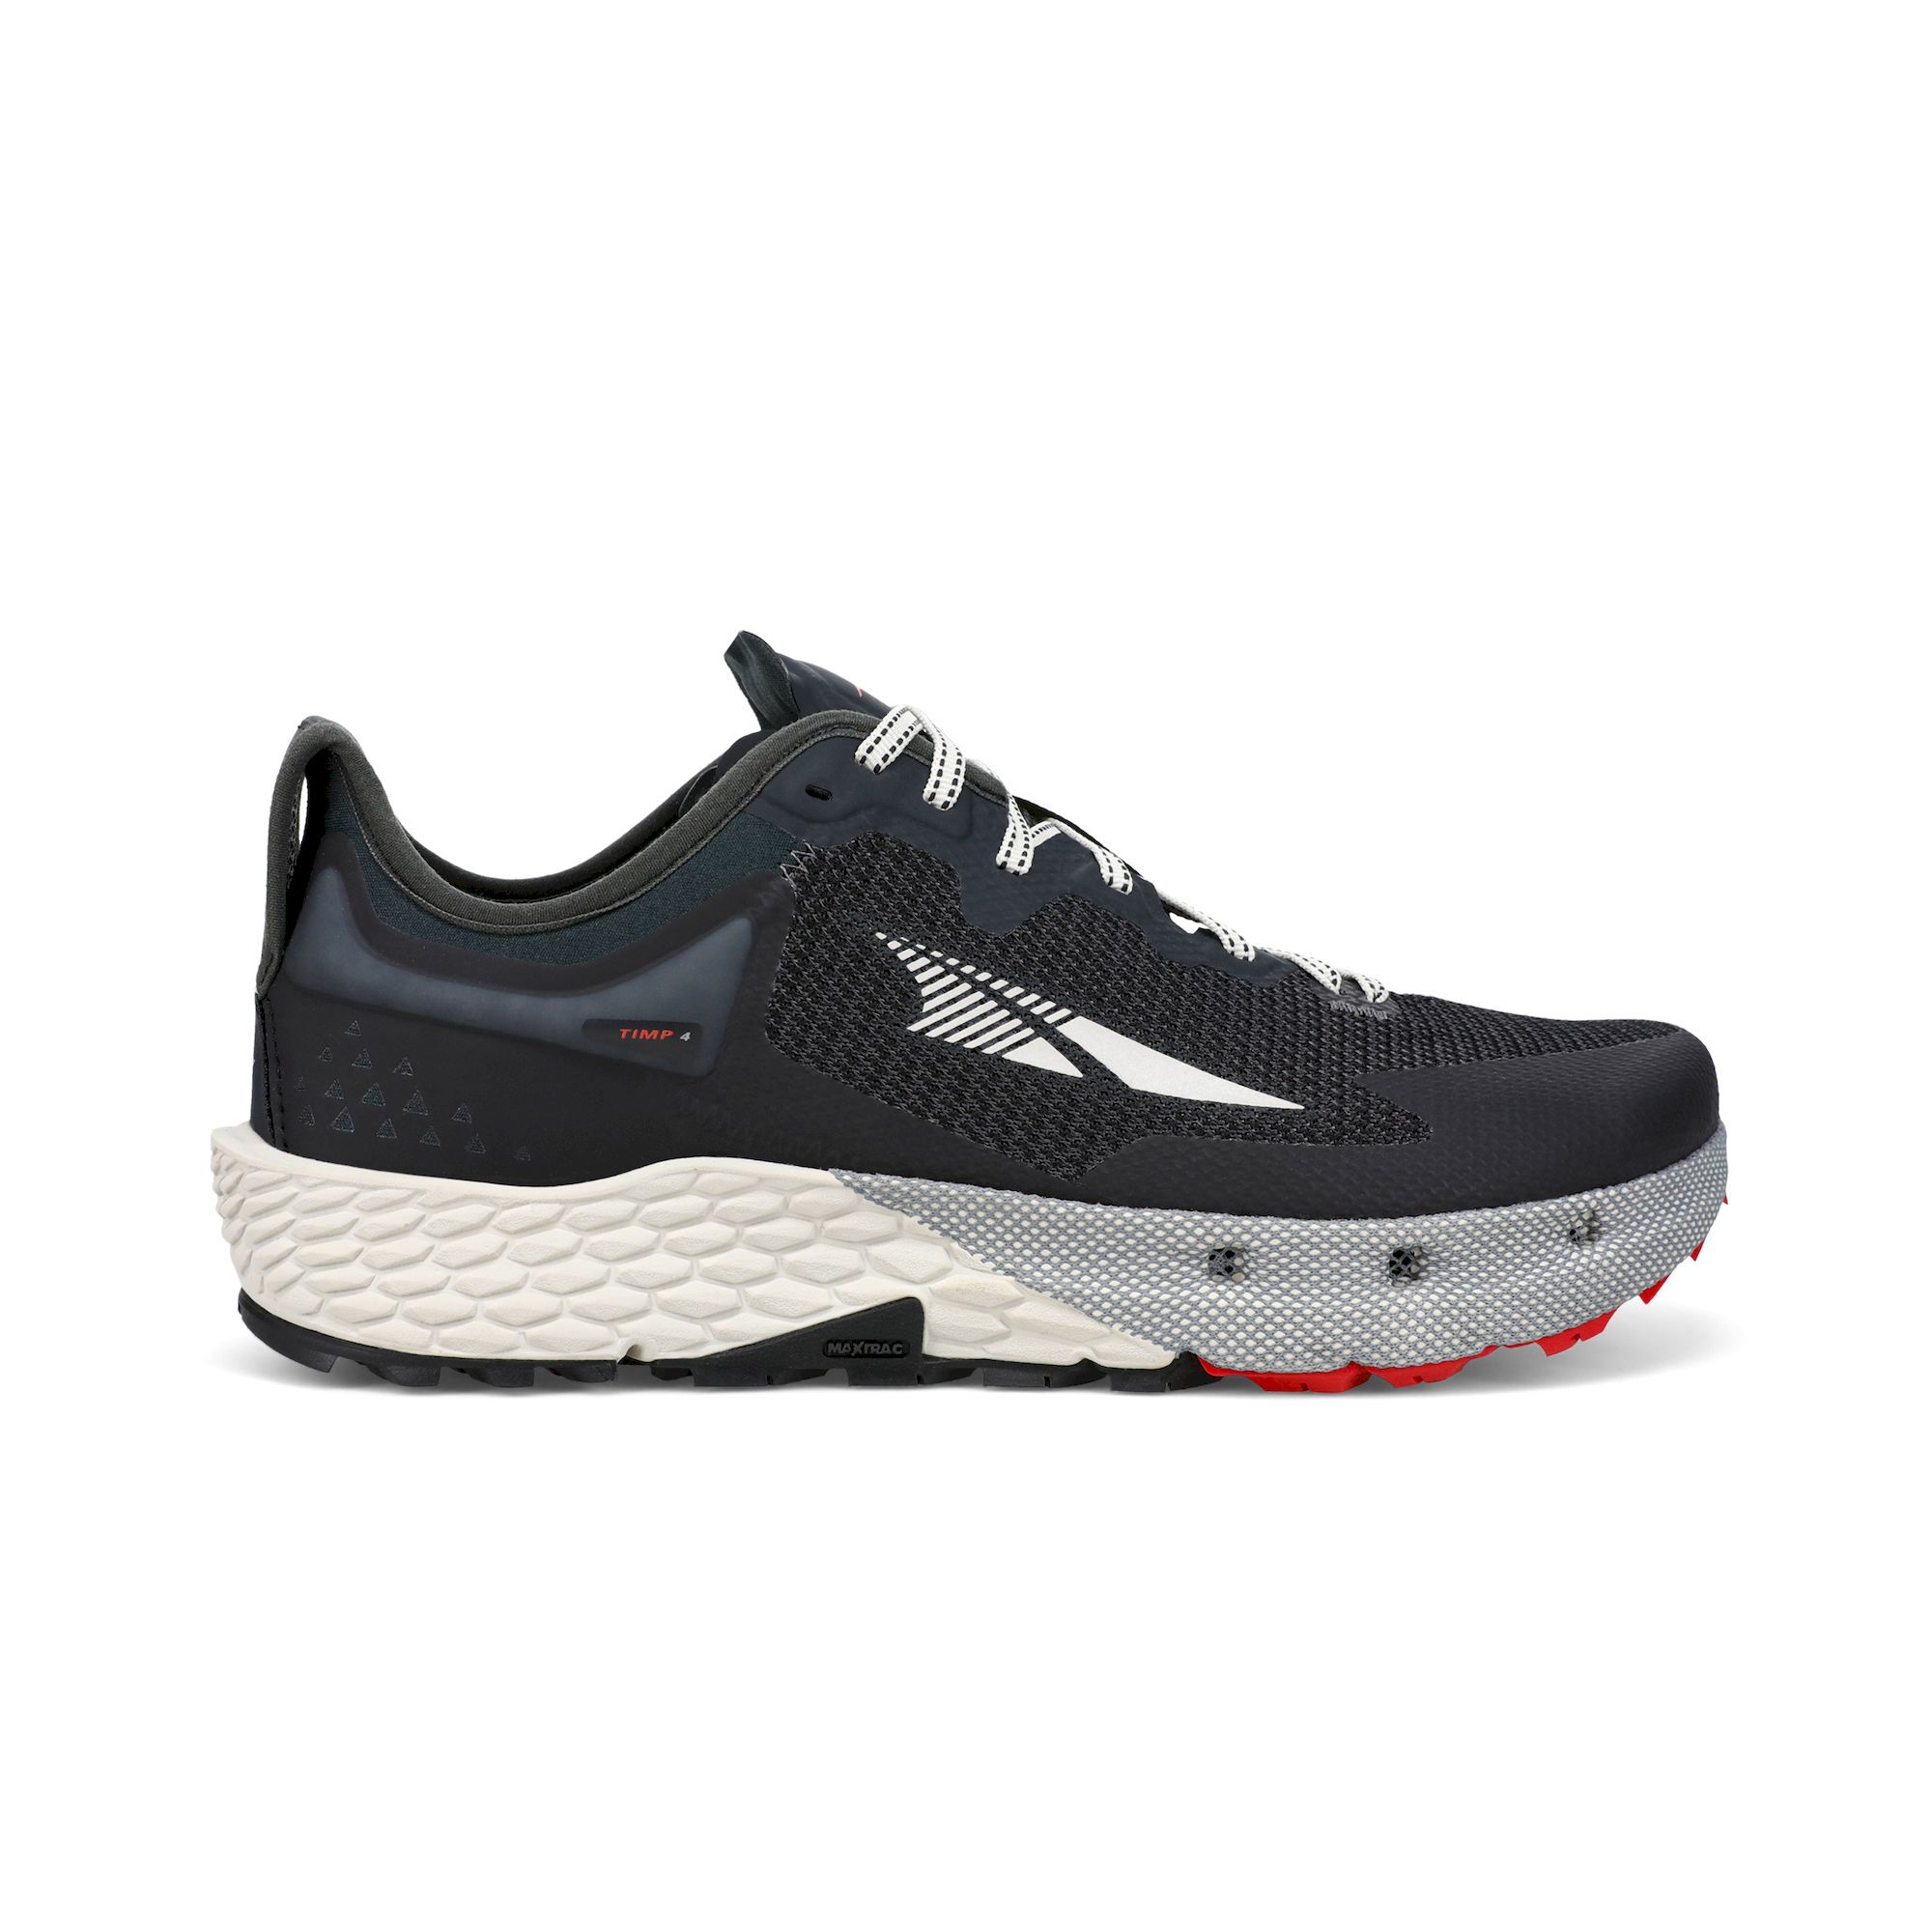 Altra Timp 4 - Trail running shoes - Men's